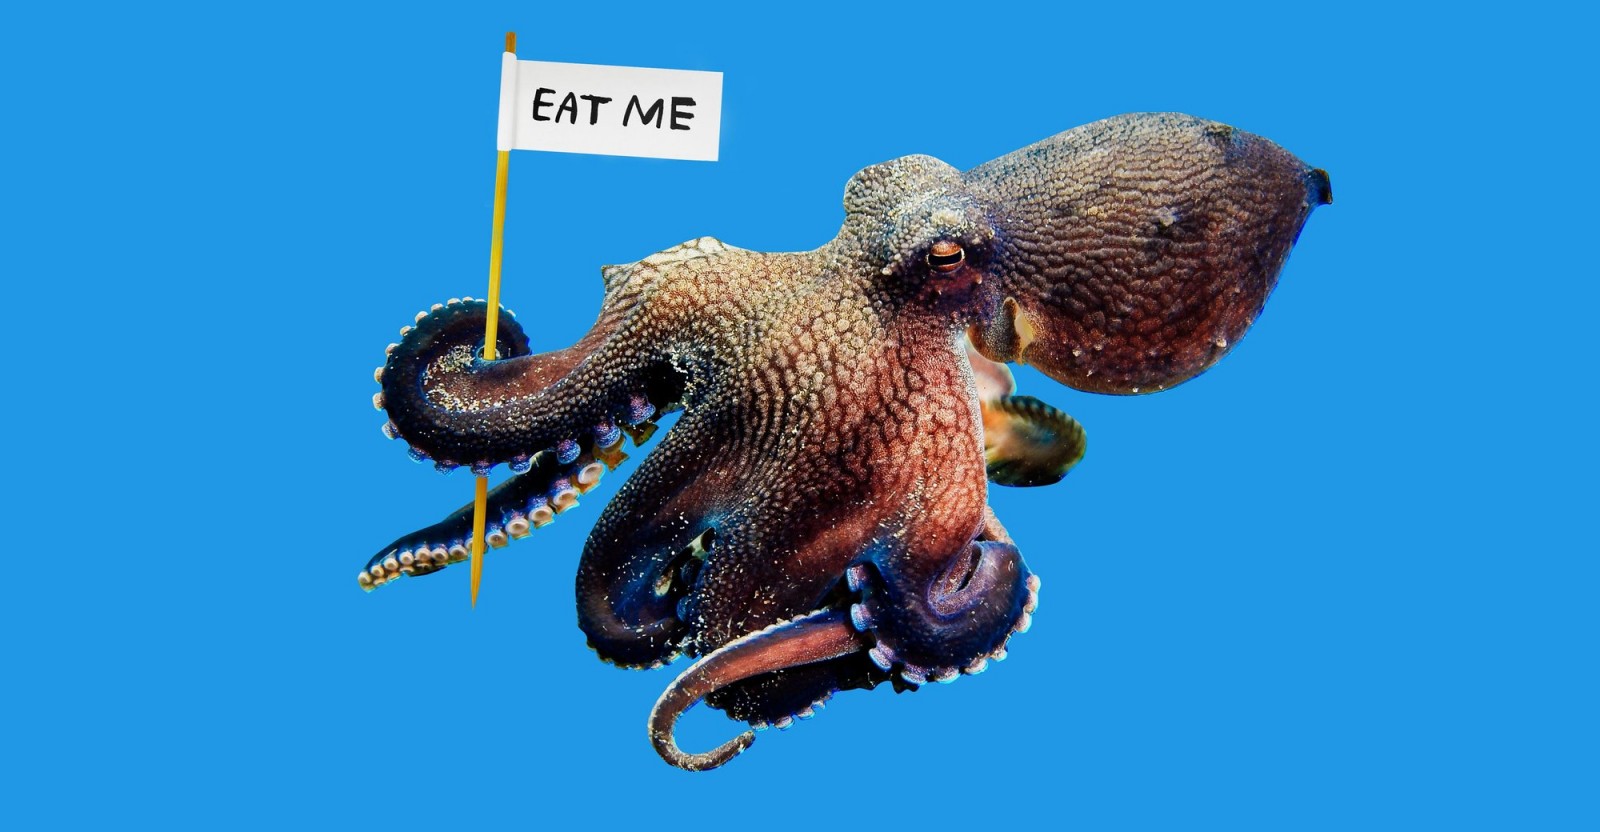 One thing I simply cannot eat is octopus. How about you?